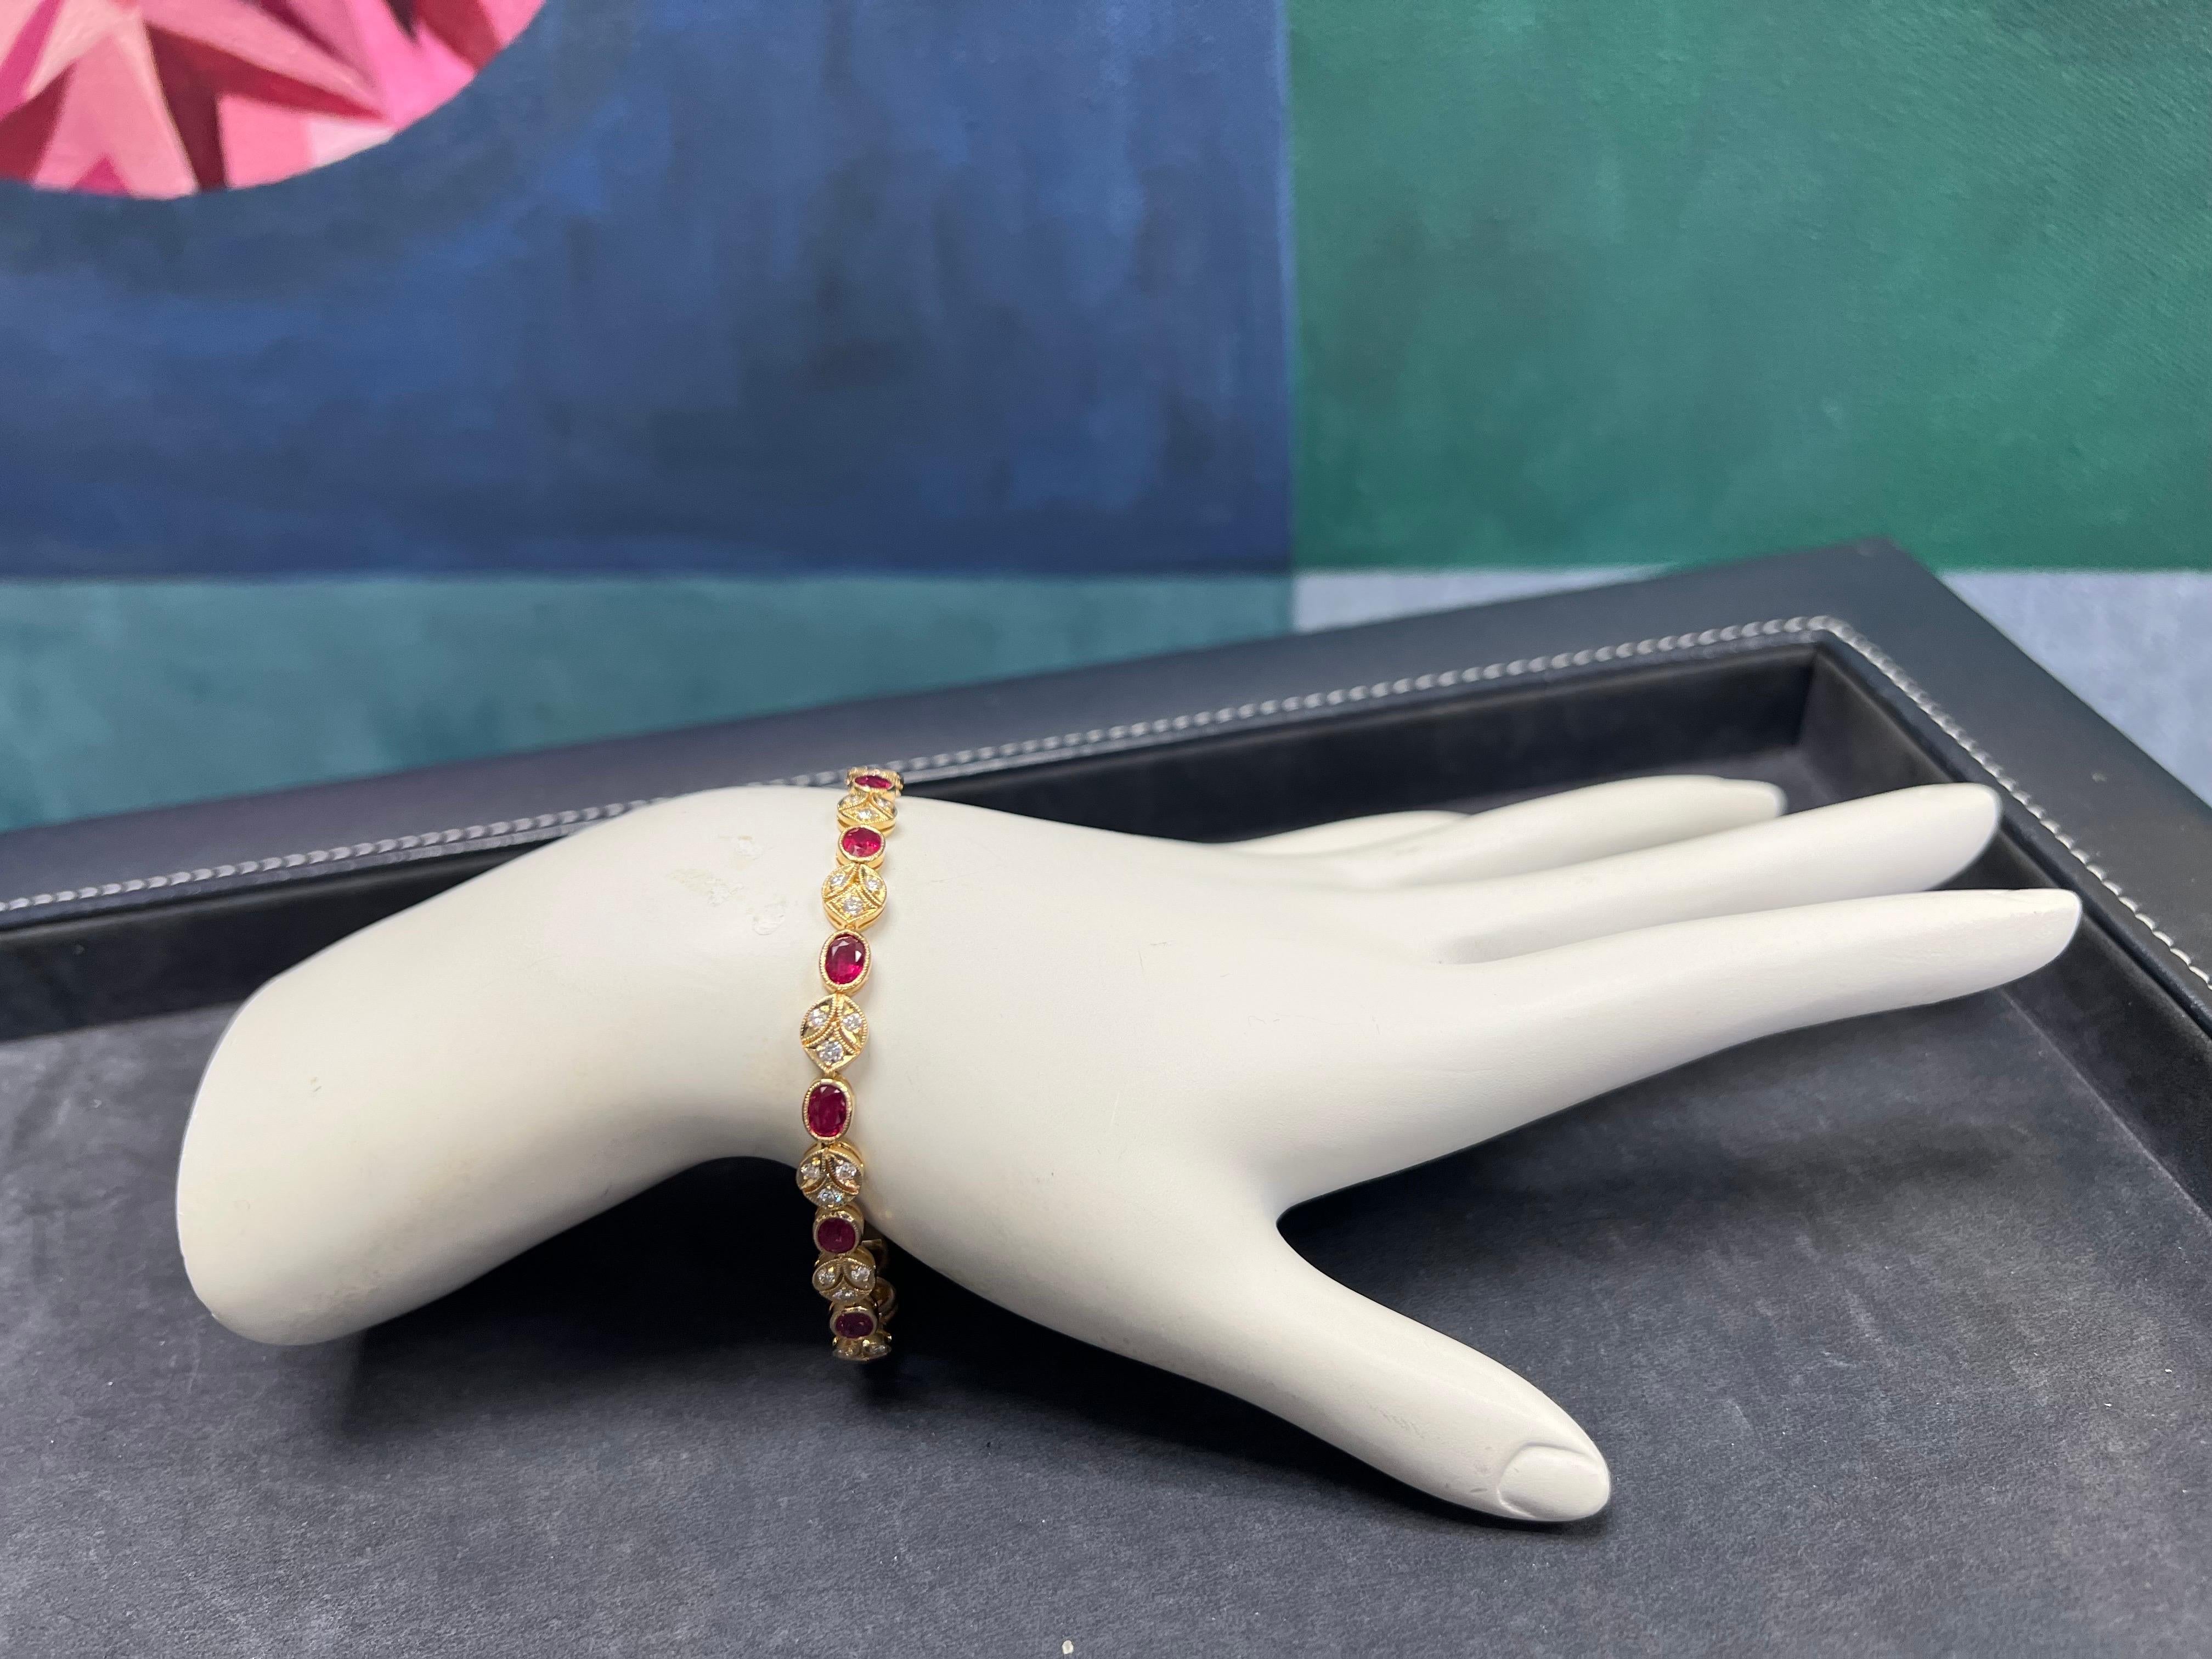 A Magnificent 5.46 carat 18k Yellow Gold Natural Ruby and Diamond Bracelet. 

The piece is set with 13 oval natural rubies weighing 4.55 carats, along with 39 natural rounds weighing 0.91 carats. 

The length is just over 6.75